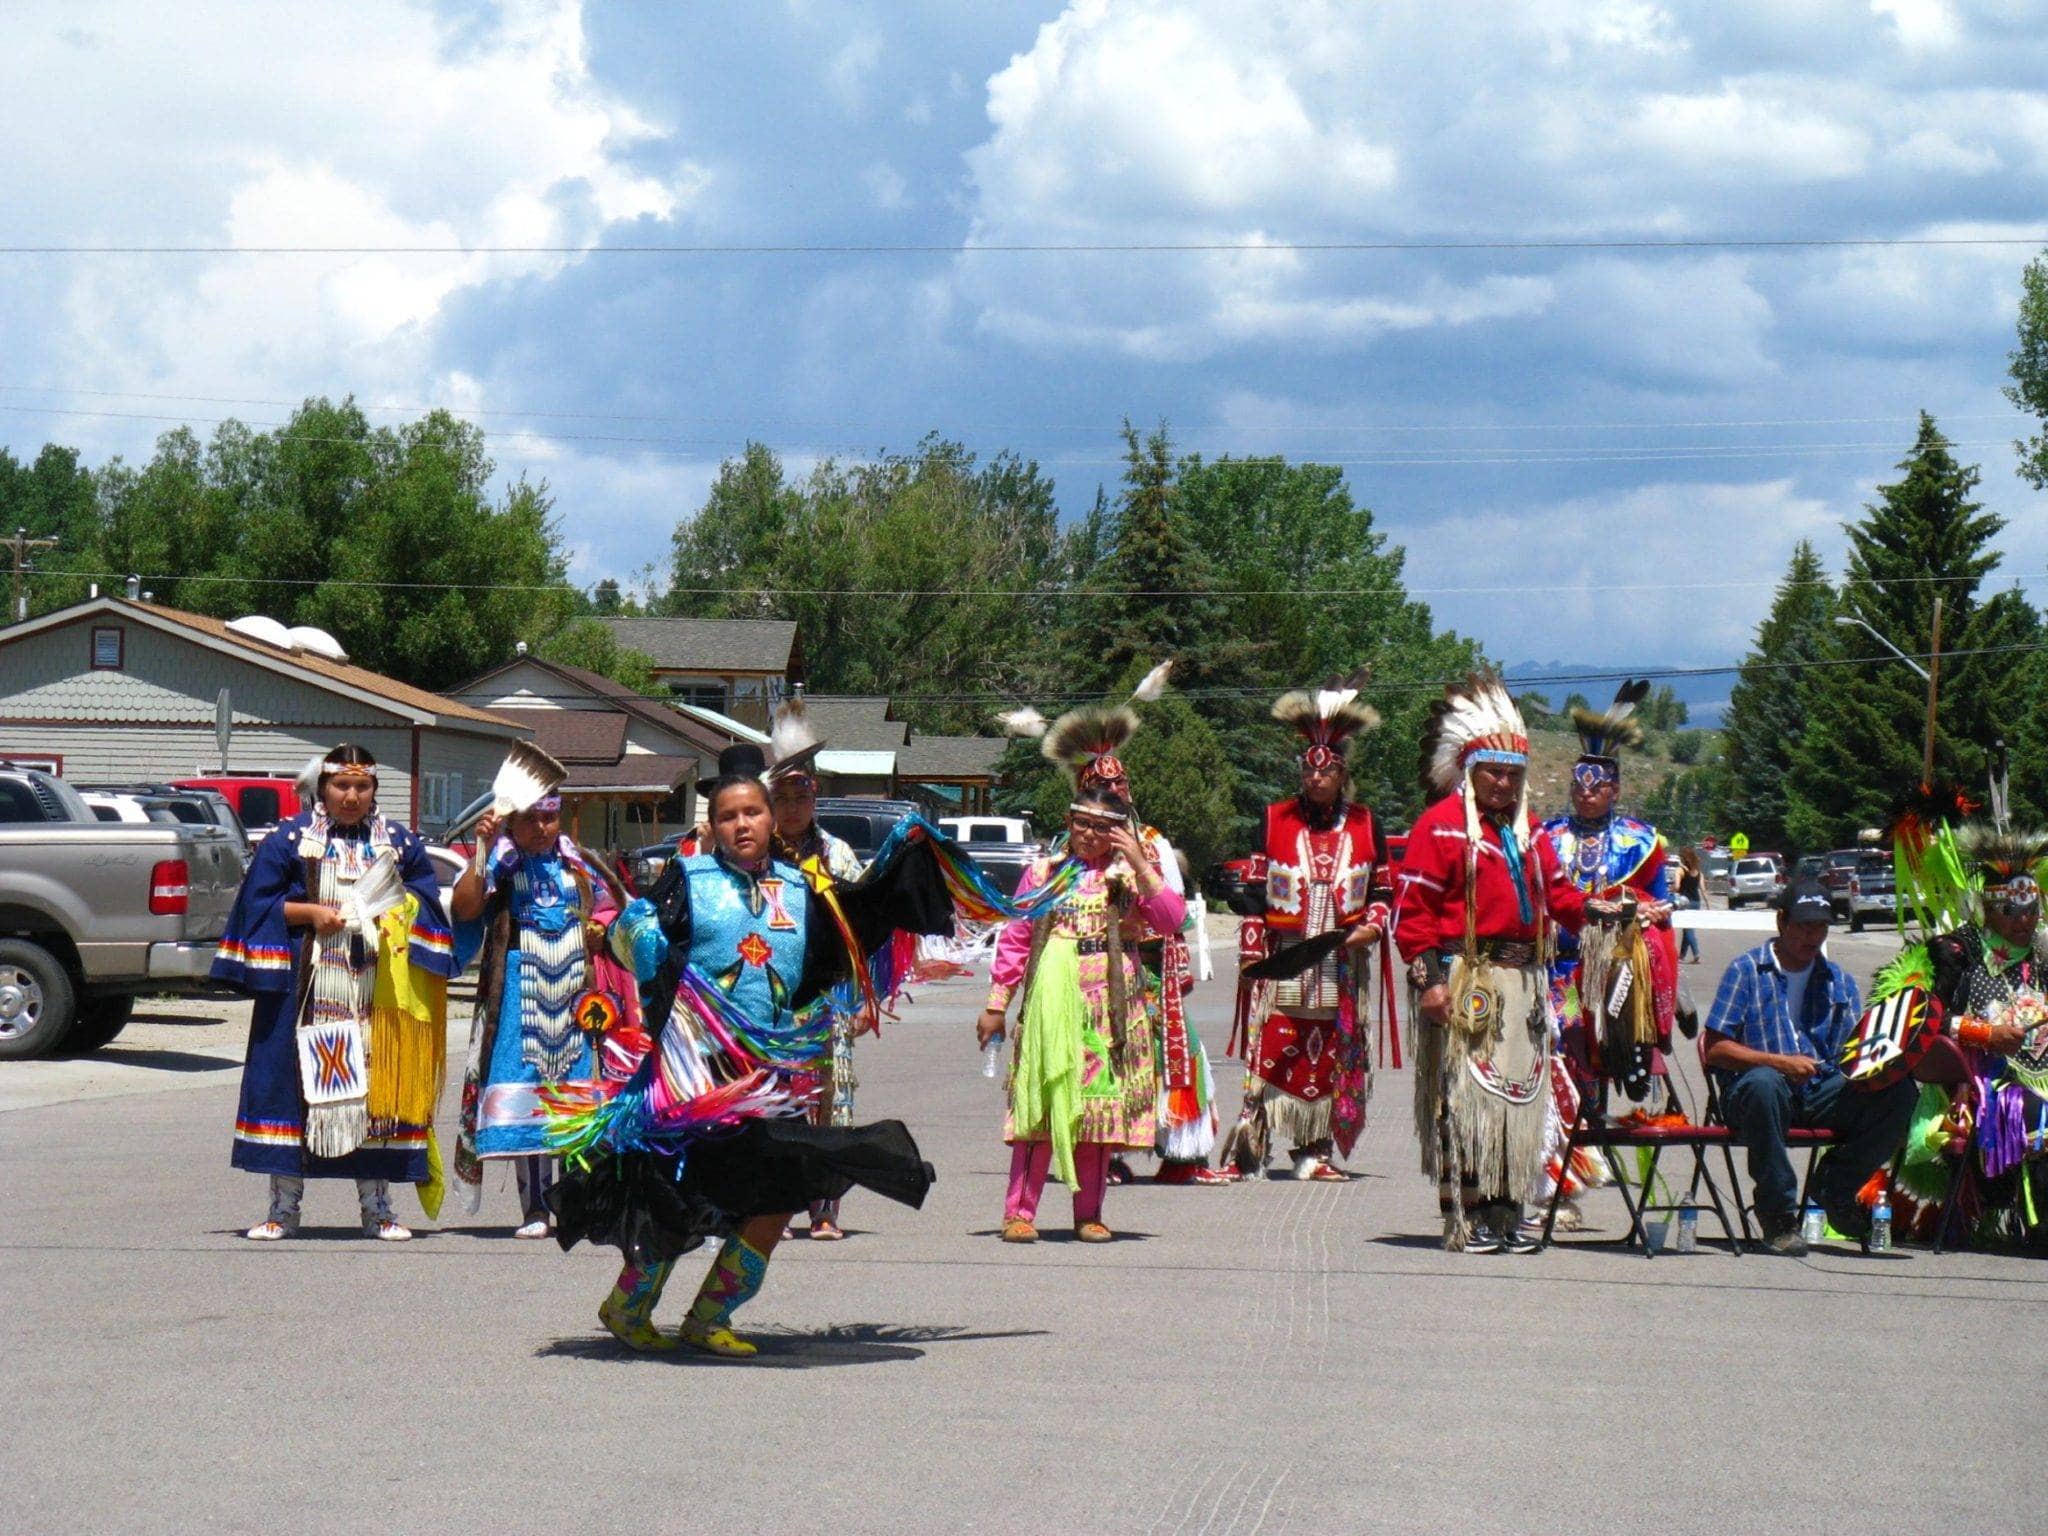 People wearing traditional clothing